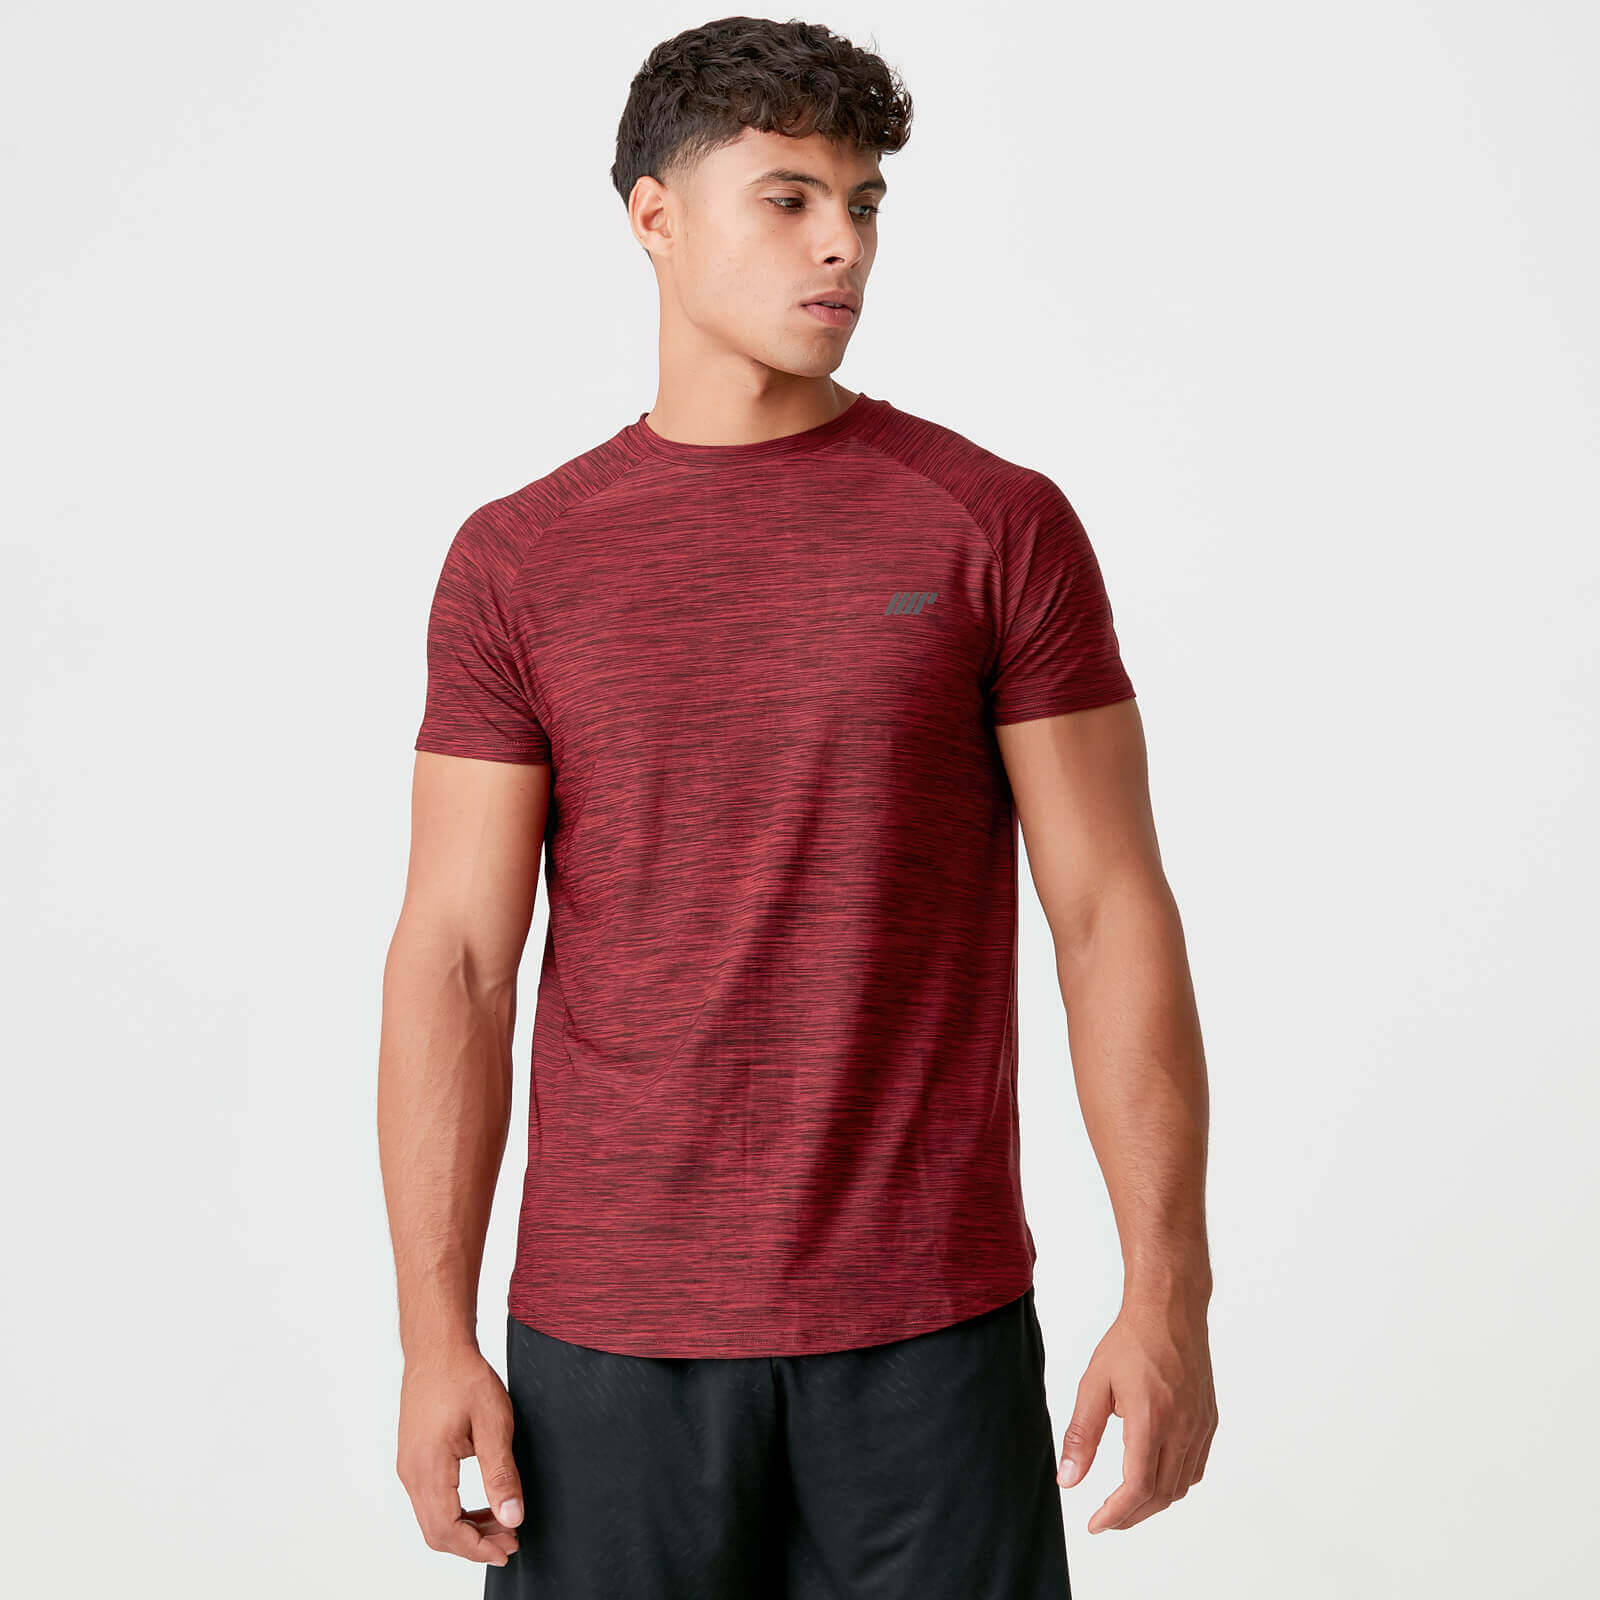 Myprotein Dry-Tech Infinity T-Shirt - Red Marl